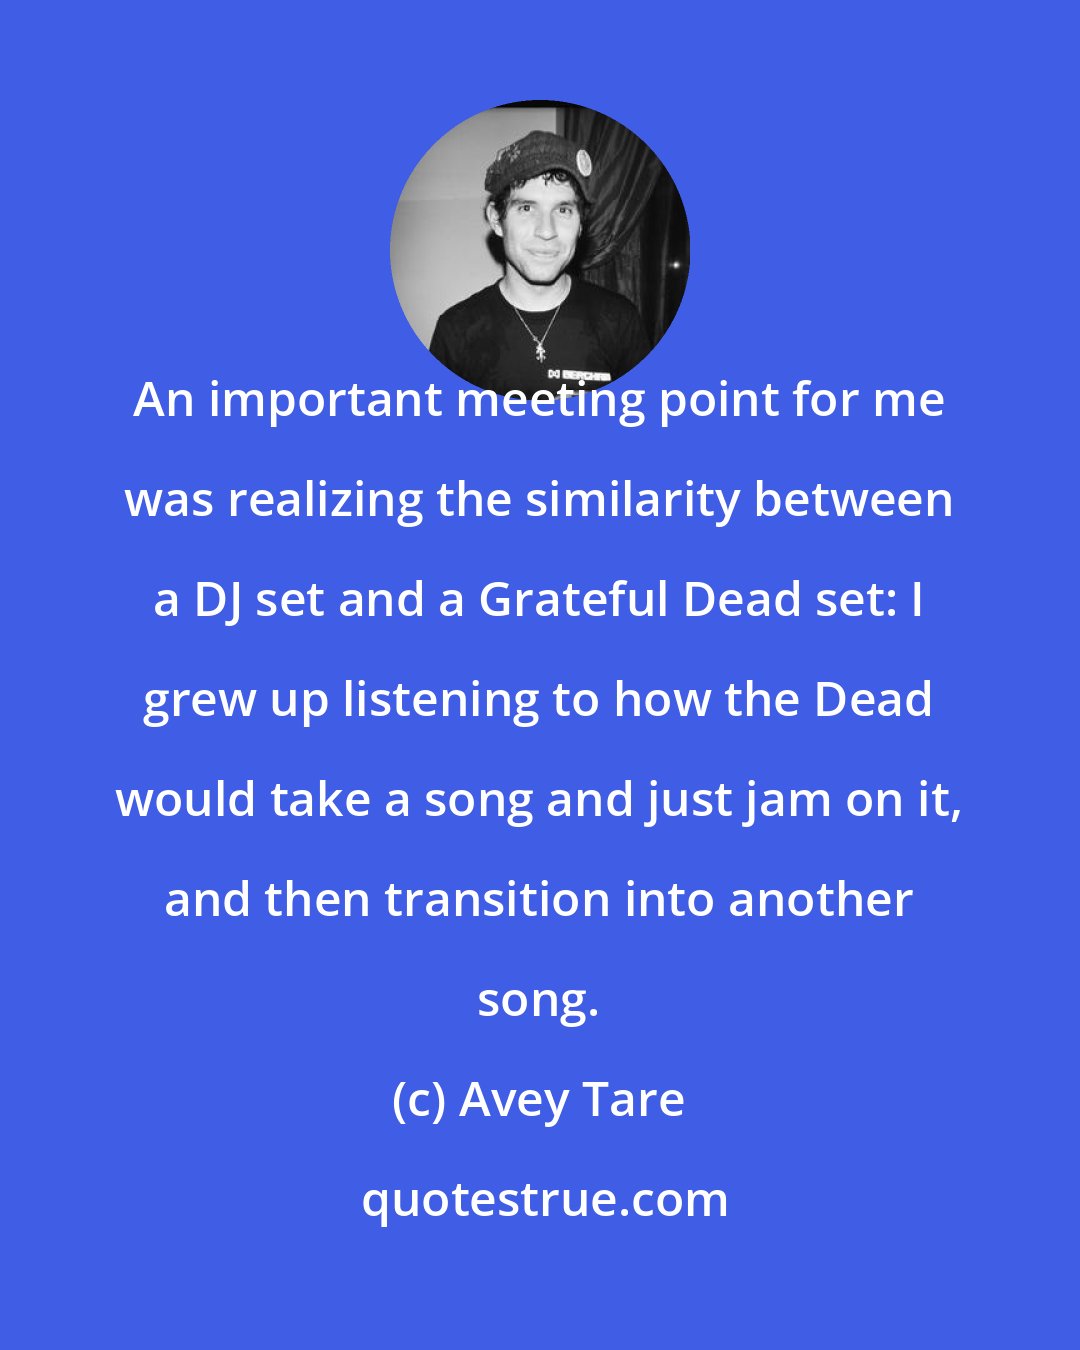 Avey Tare: An important meeting point for me was realizing the similarity between a DJ set and a Grateful Dead set: I grew up listening to how the Dead would take a song and just jam on it, and then transition into another song.